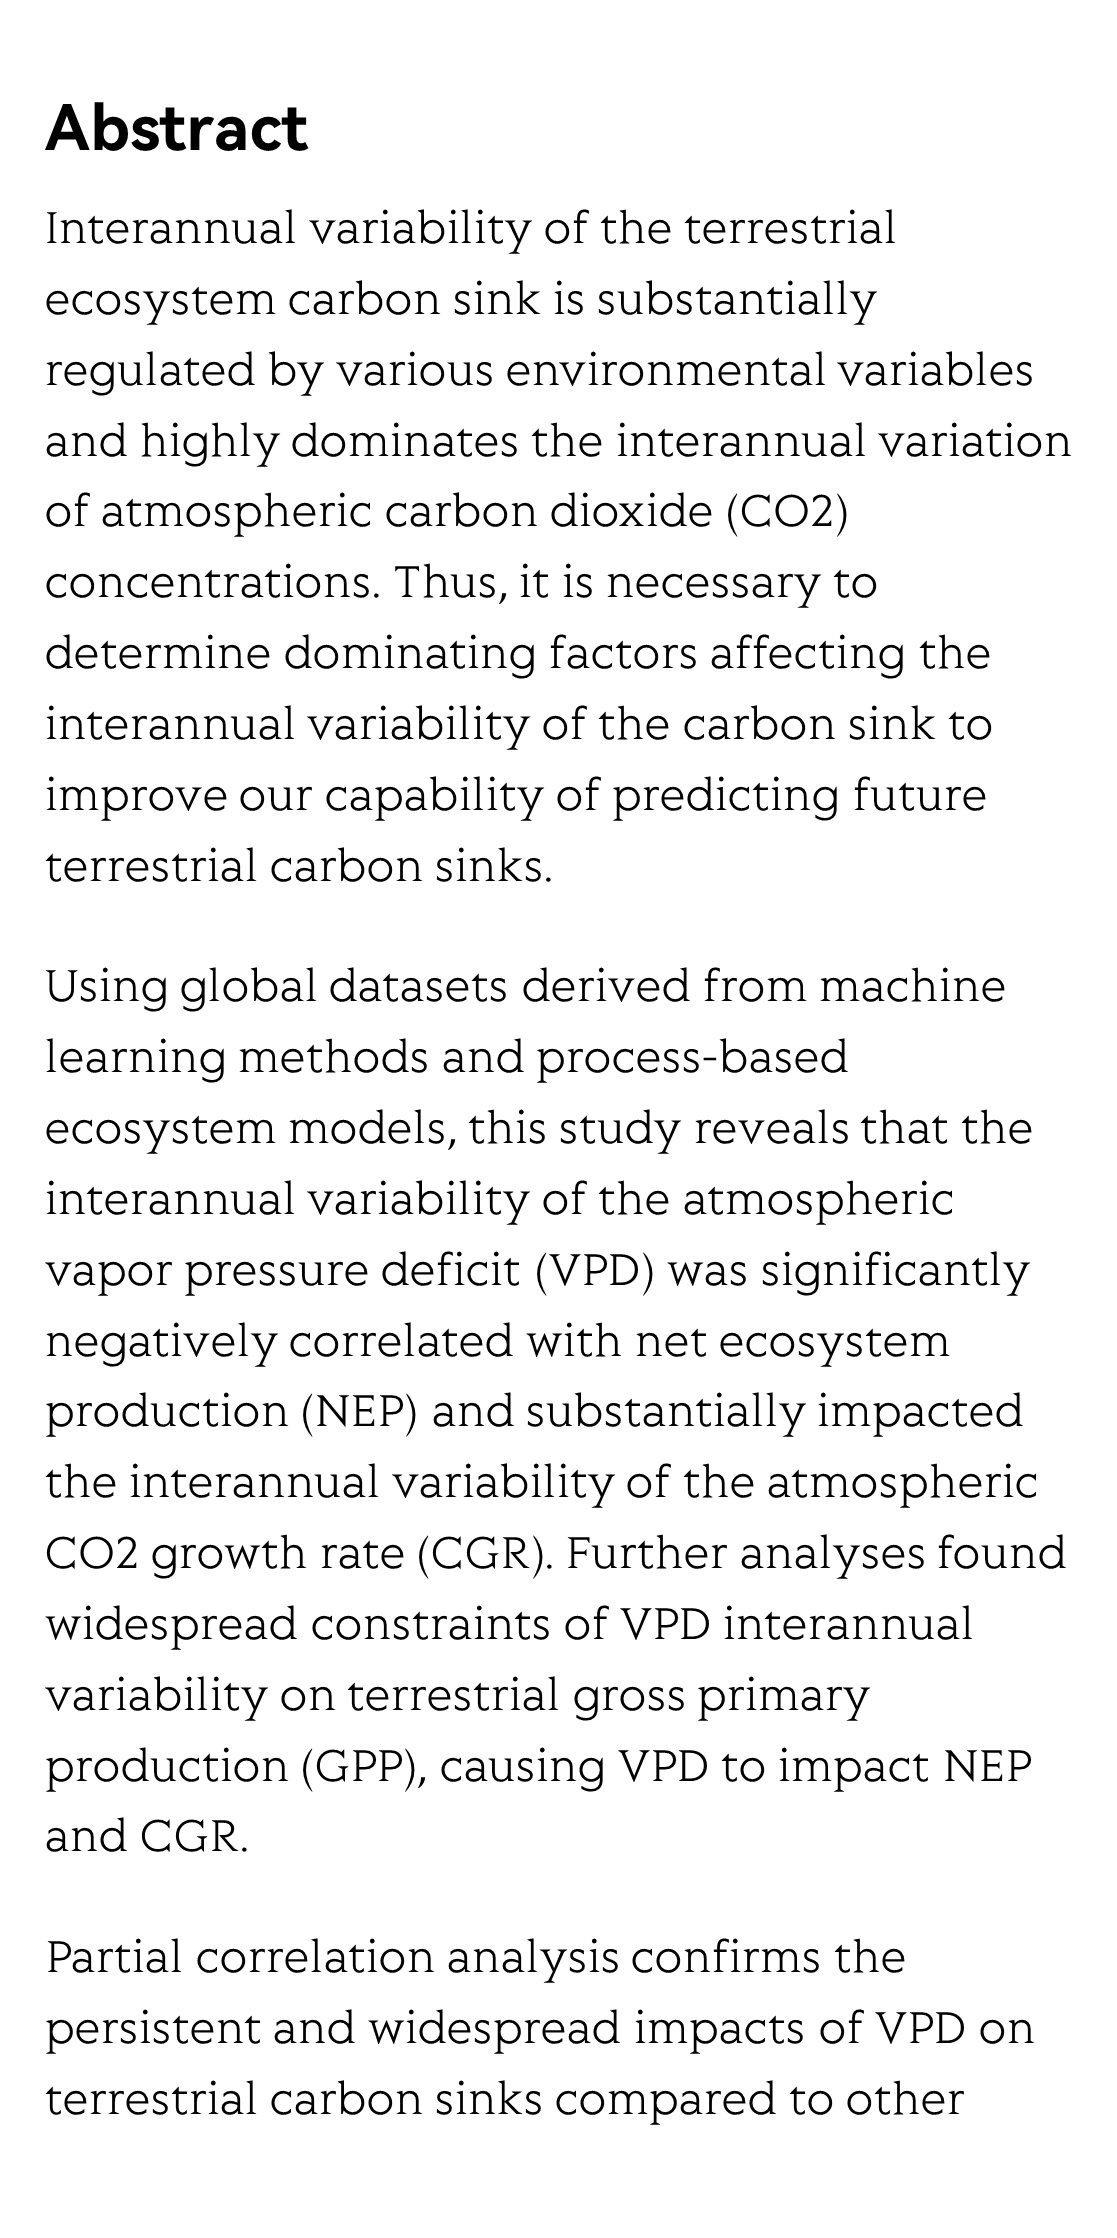 Worldwide impacts of atmospheric vapor pressure deficit on the interannual variability of terrestrial carbon sinks_2